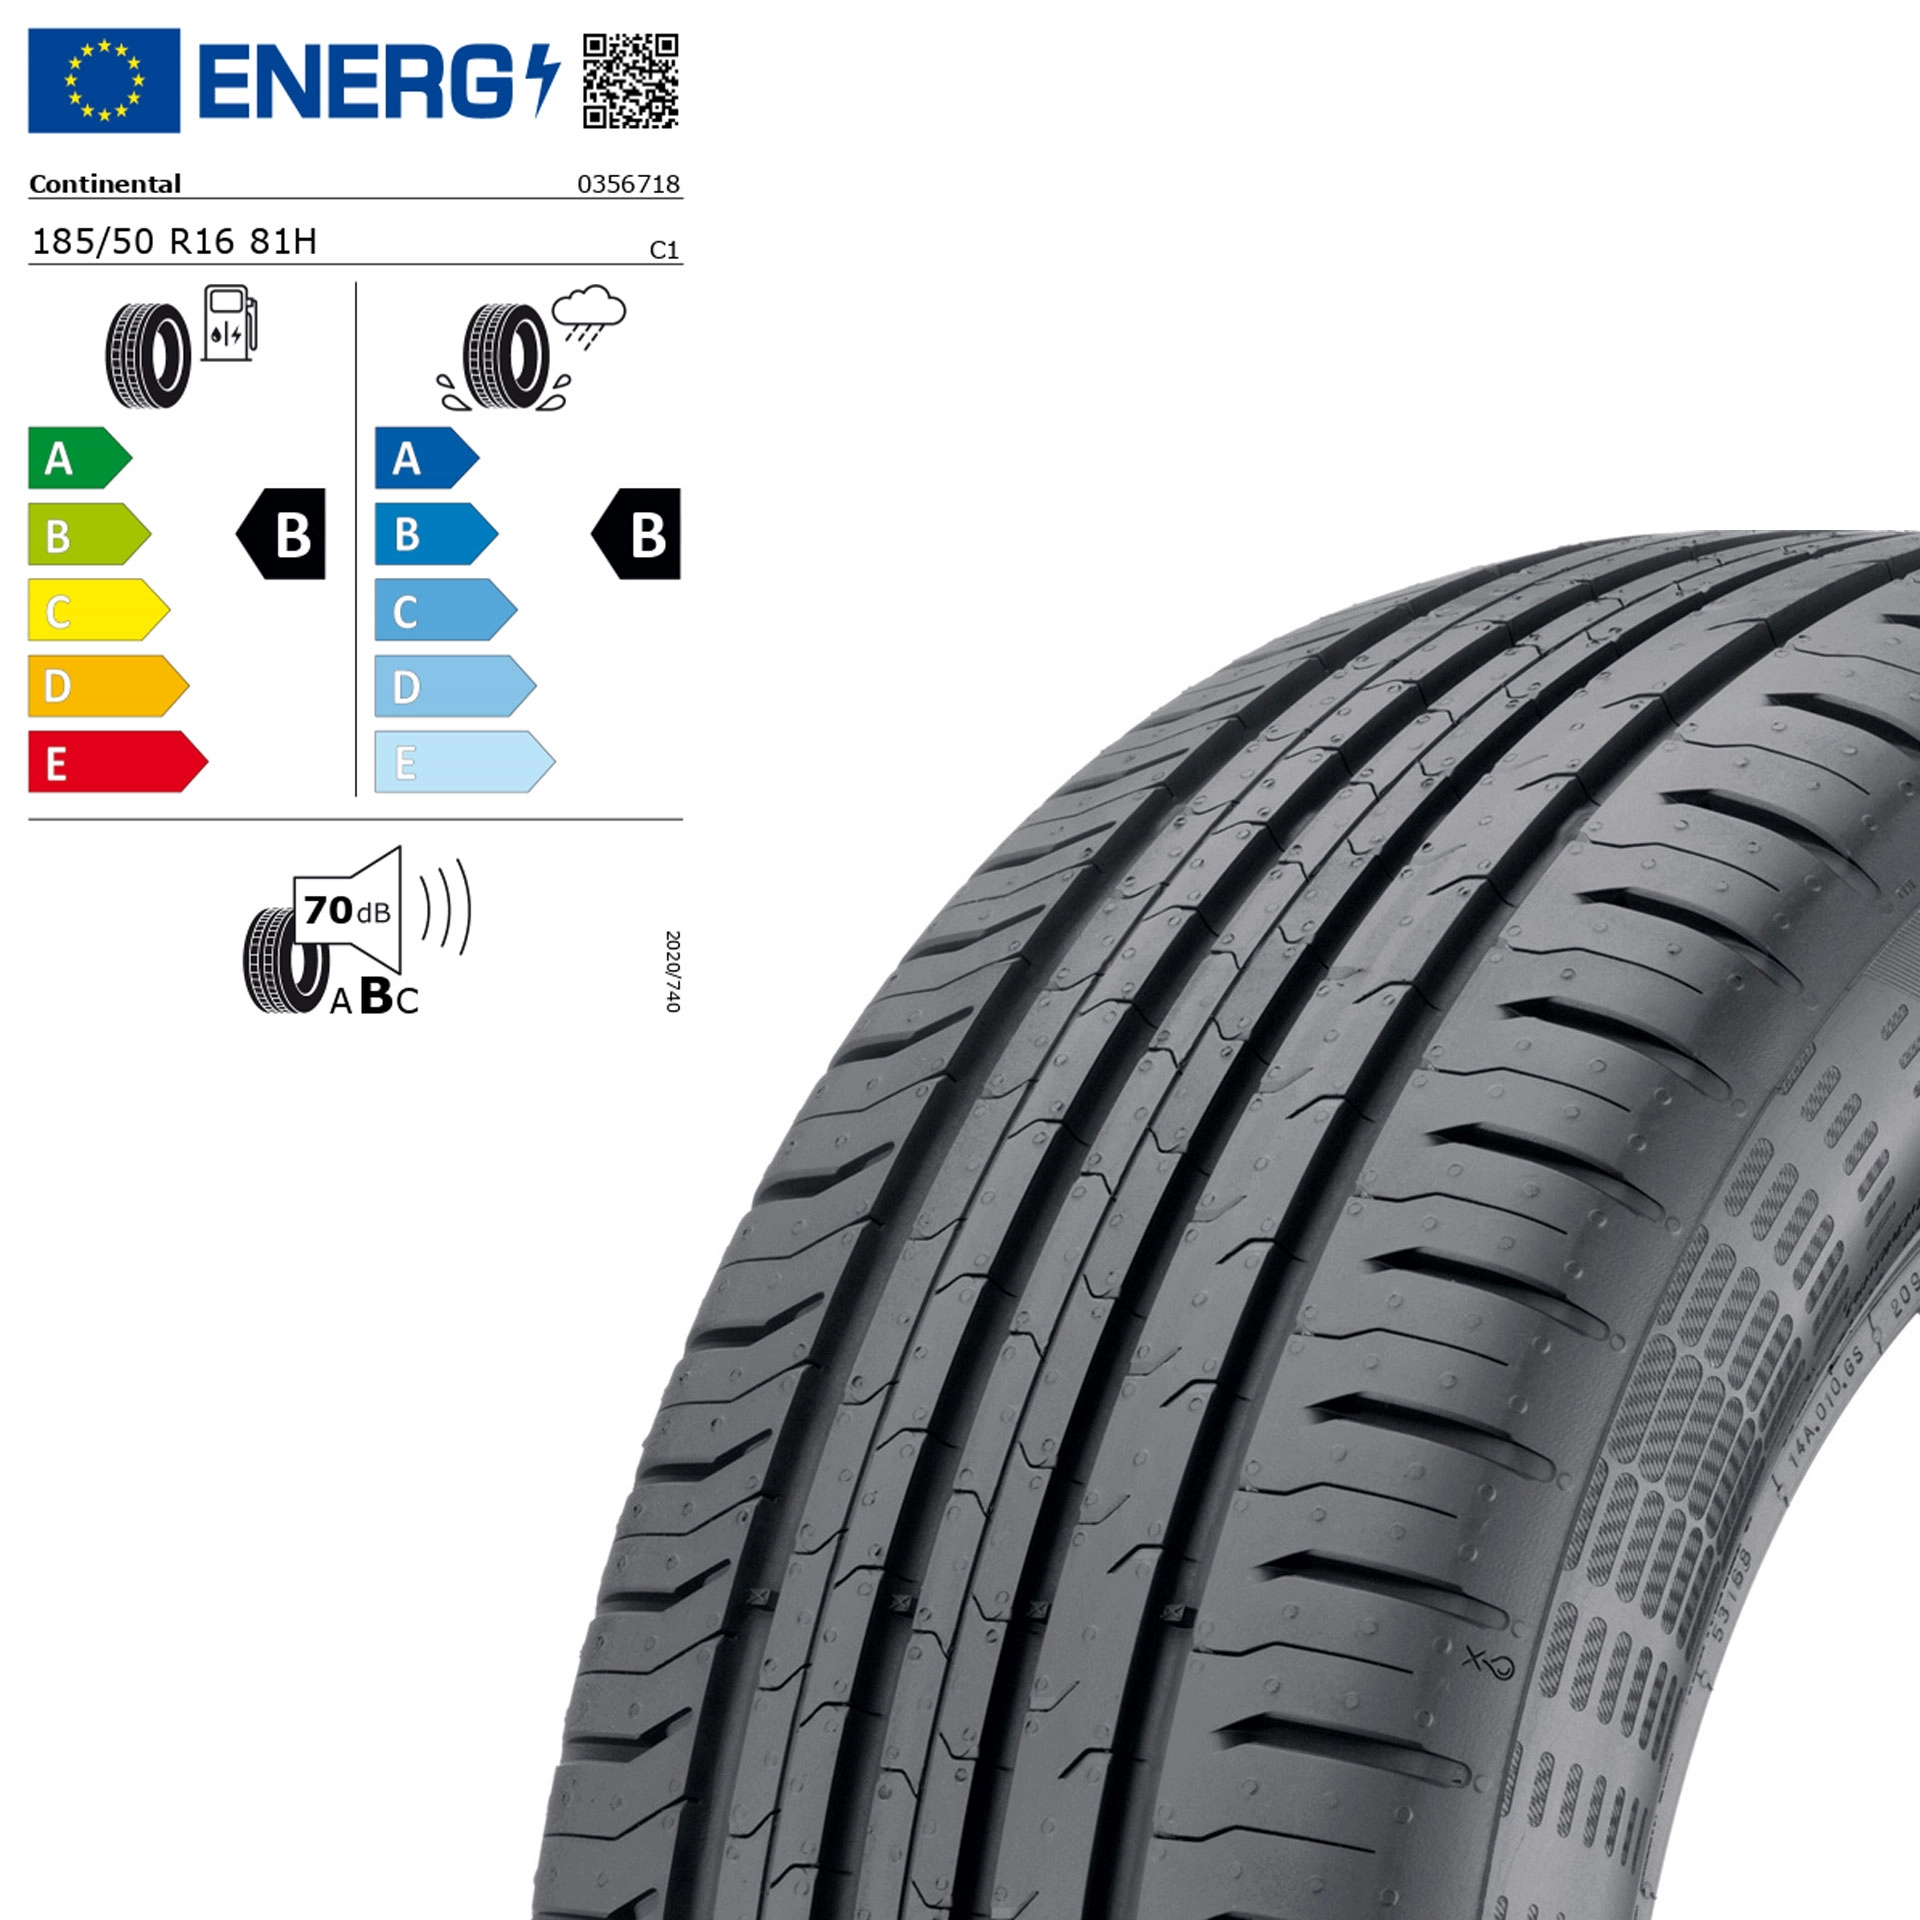 185/50 R16 81H Continental ContiEcoContact 5 - Sommerreifen Q44003111008A